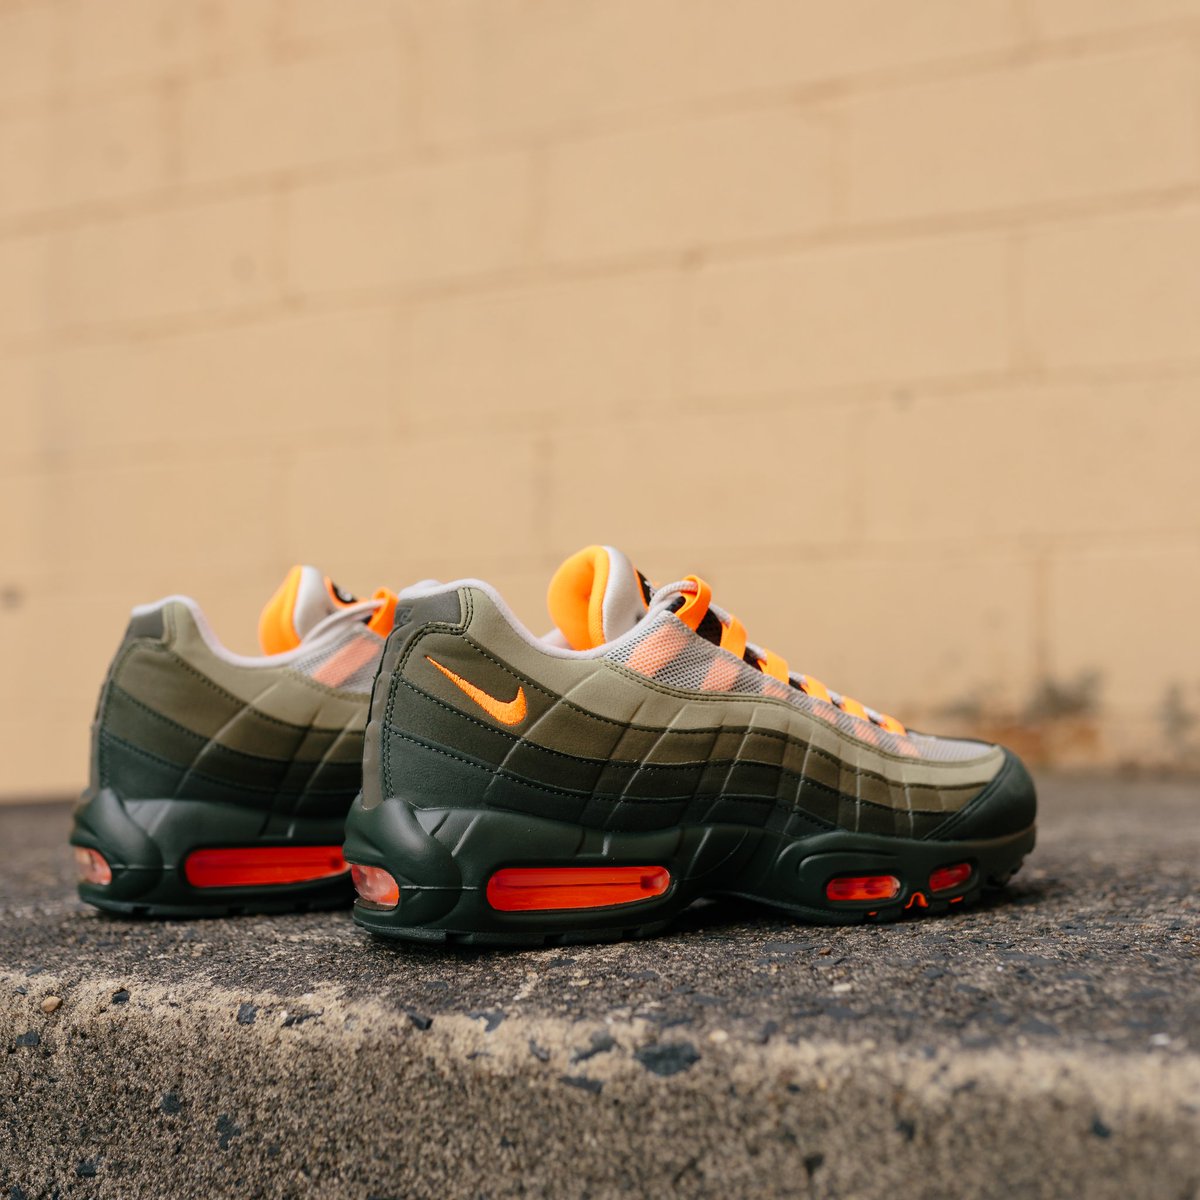 dope 95 air max on